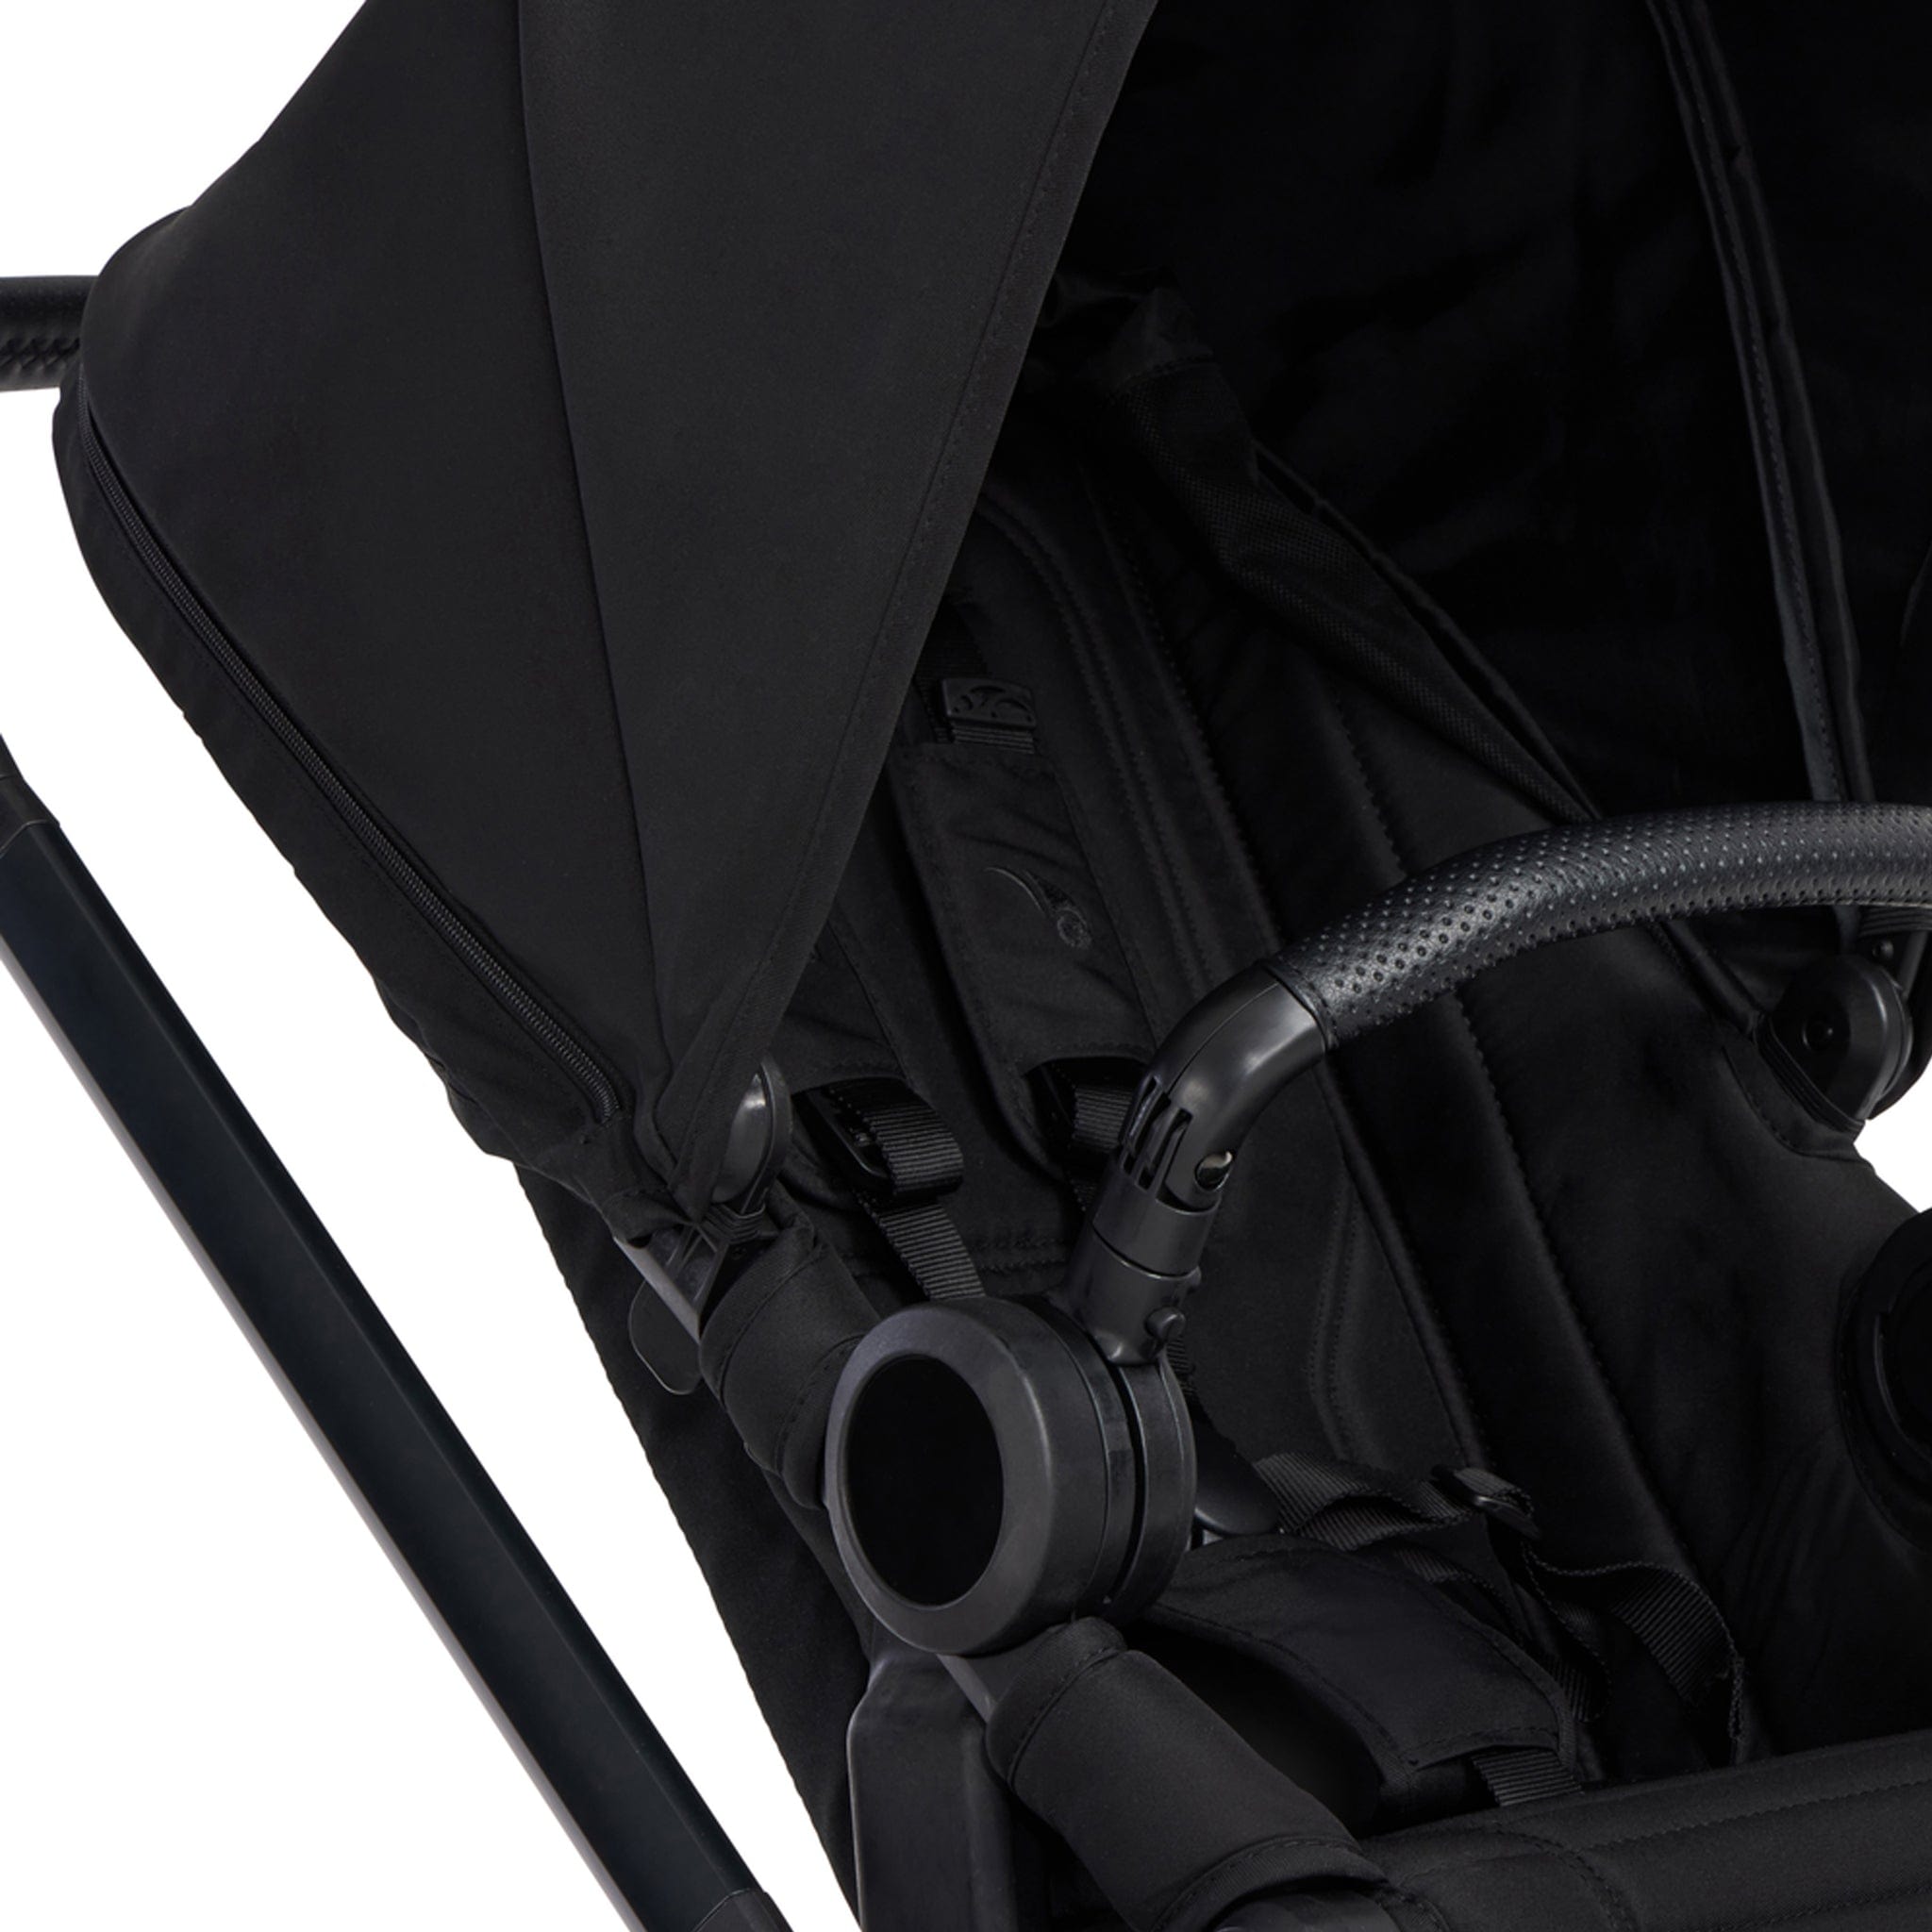 Baby Jogger baby pushchairs Baby Jogger City Sights Bundle - Rich Black